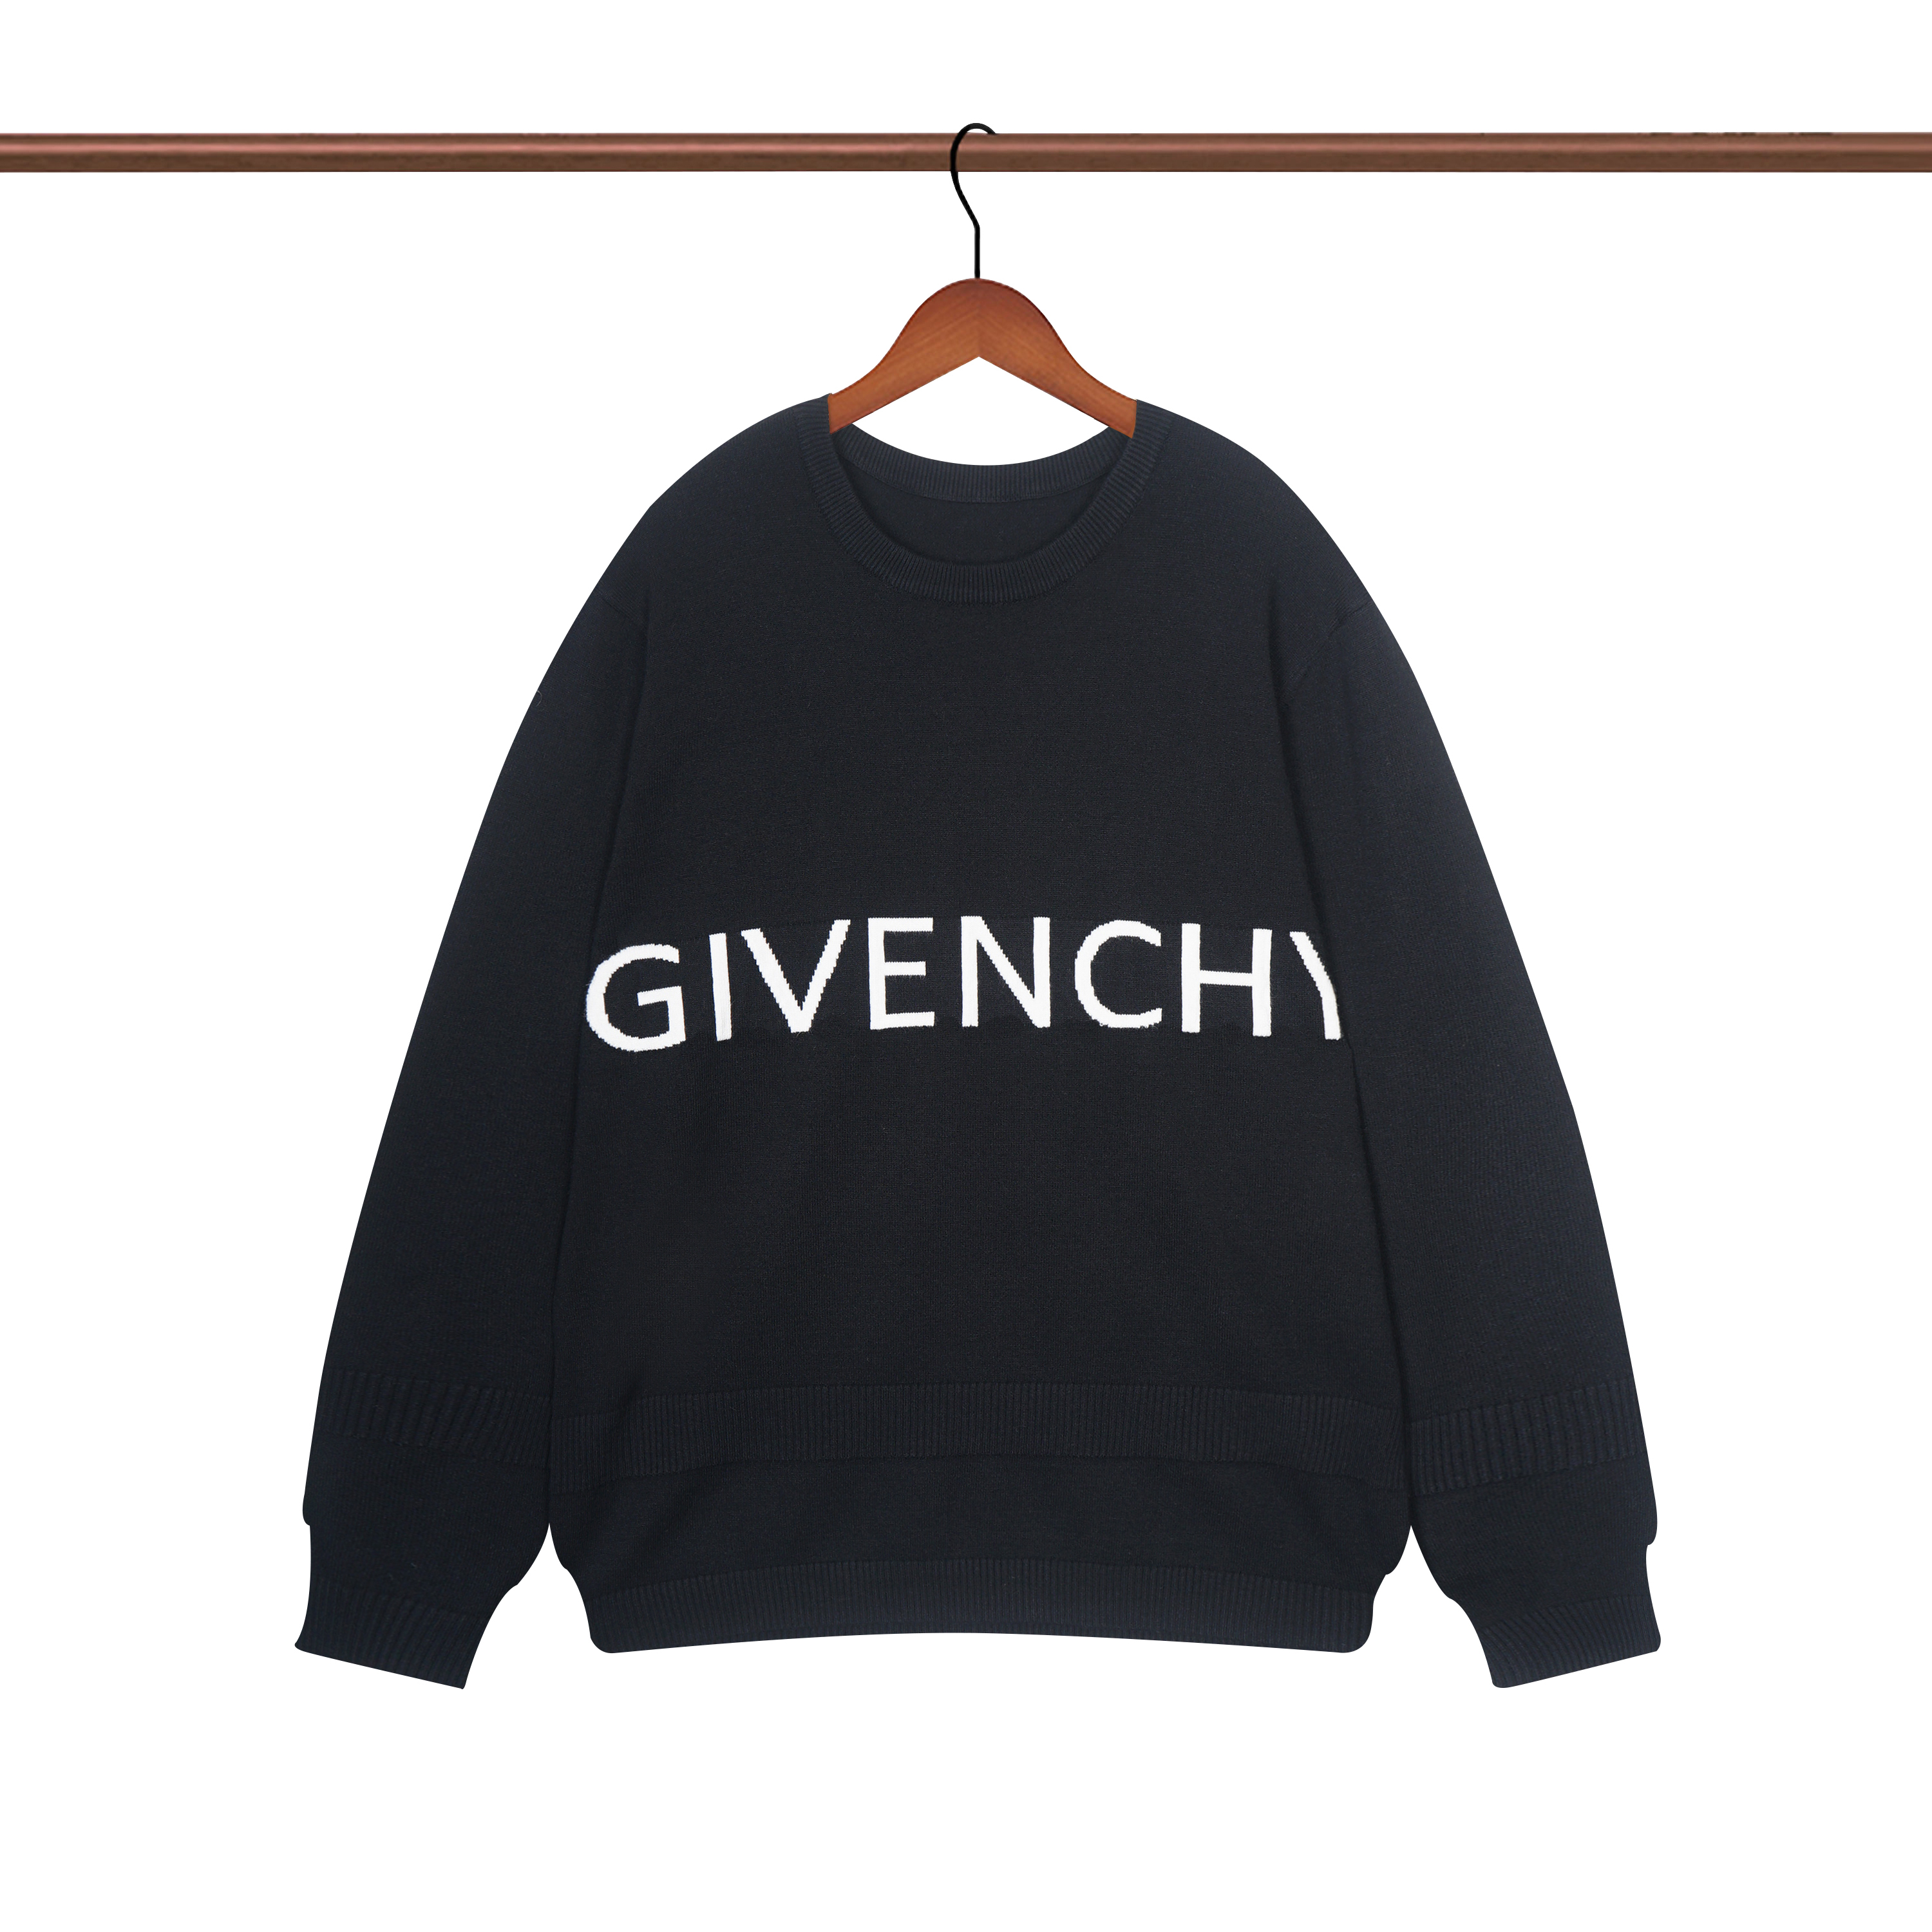 Givenchy Round Neck Sweater Unisex # 260484, cheap Givenchy Sweaters, only $48!